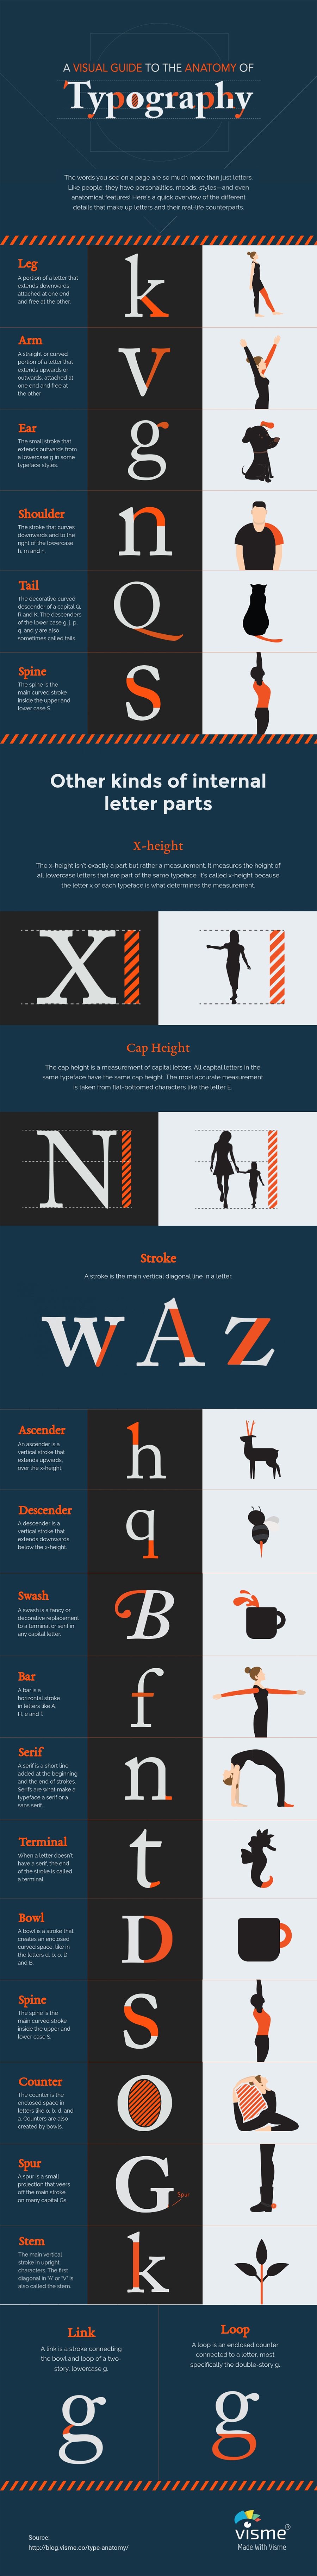 Design Guide: How To Understand Typography